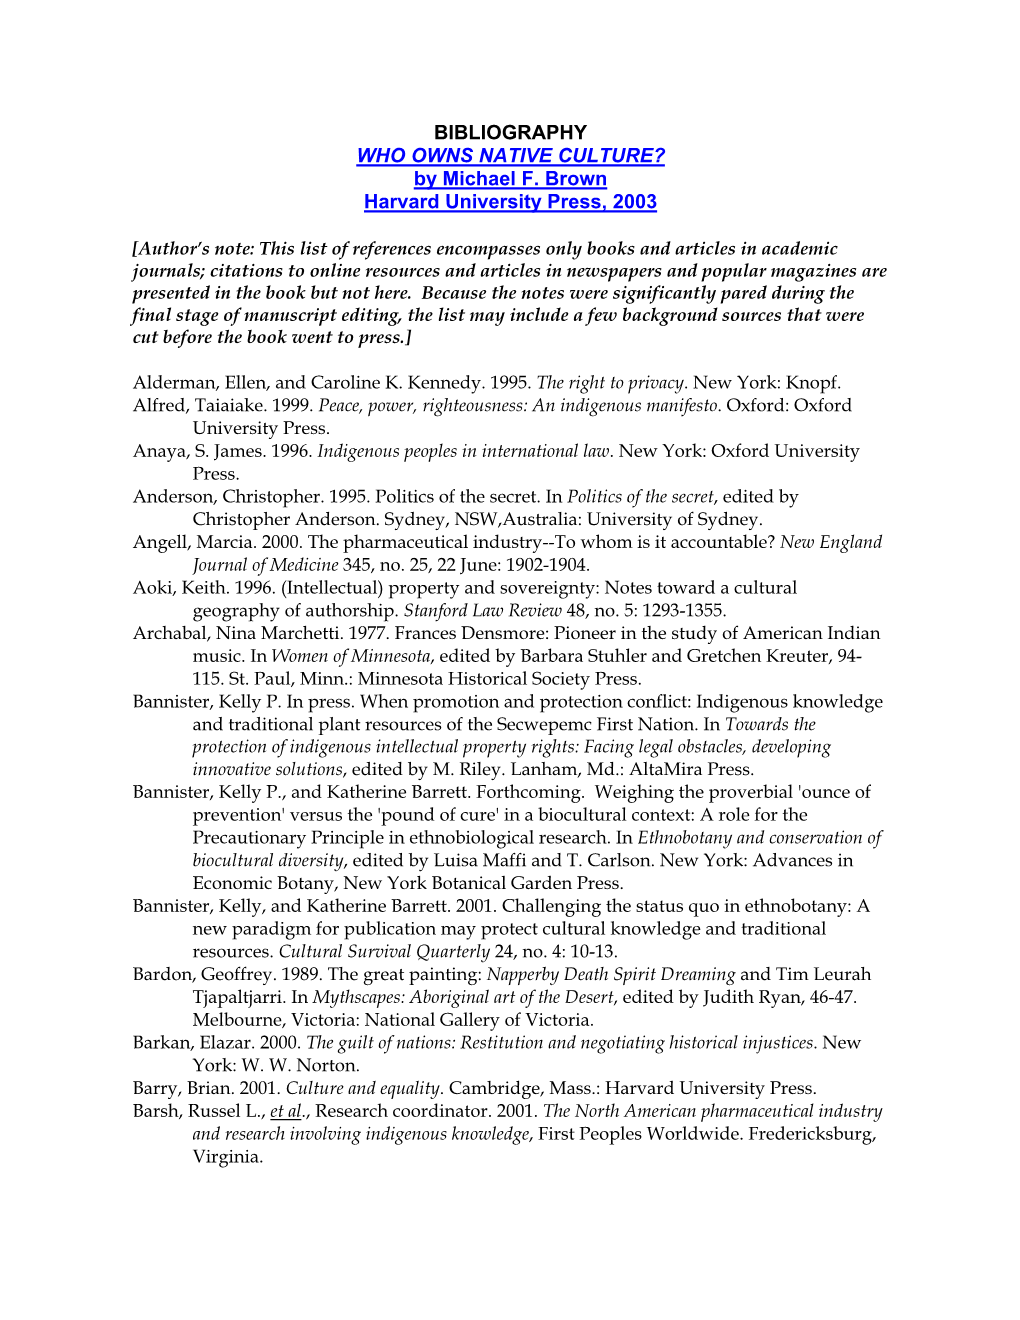 BIBLIOGRAPHY WHO OWNS NATIVE CULTURE? by Michael F